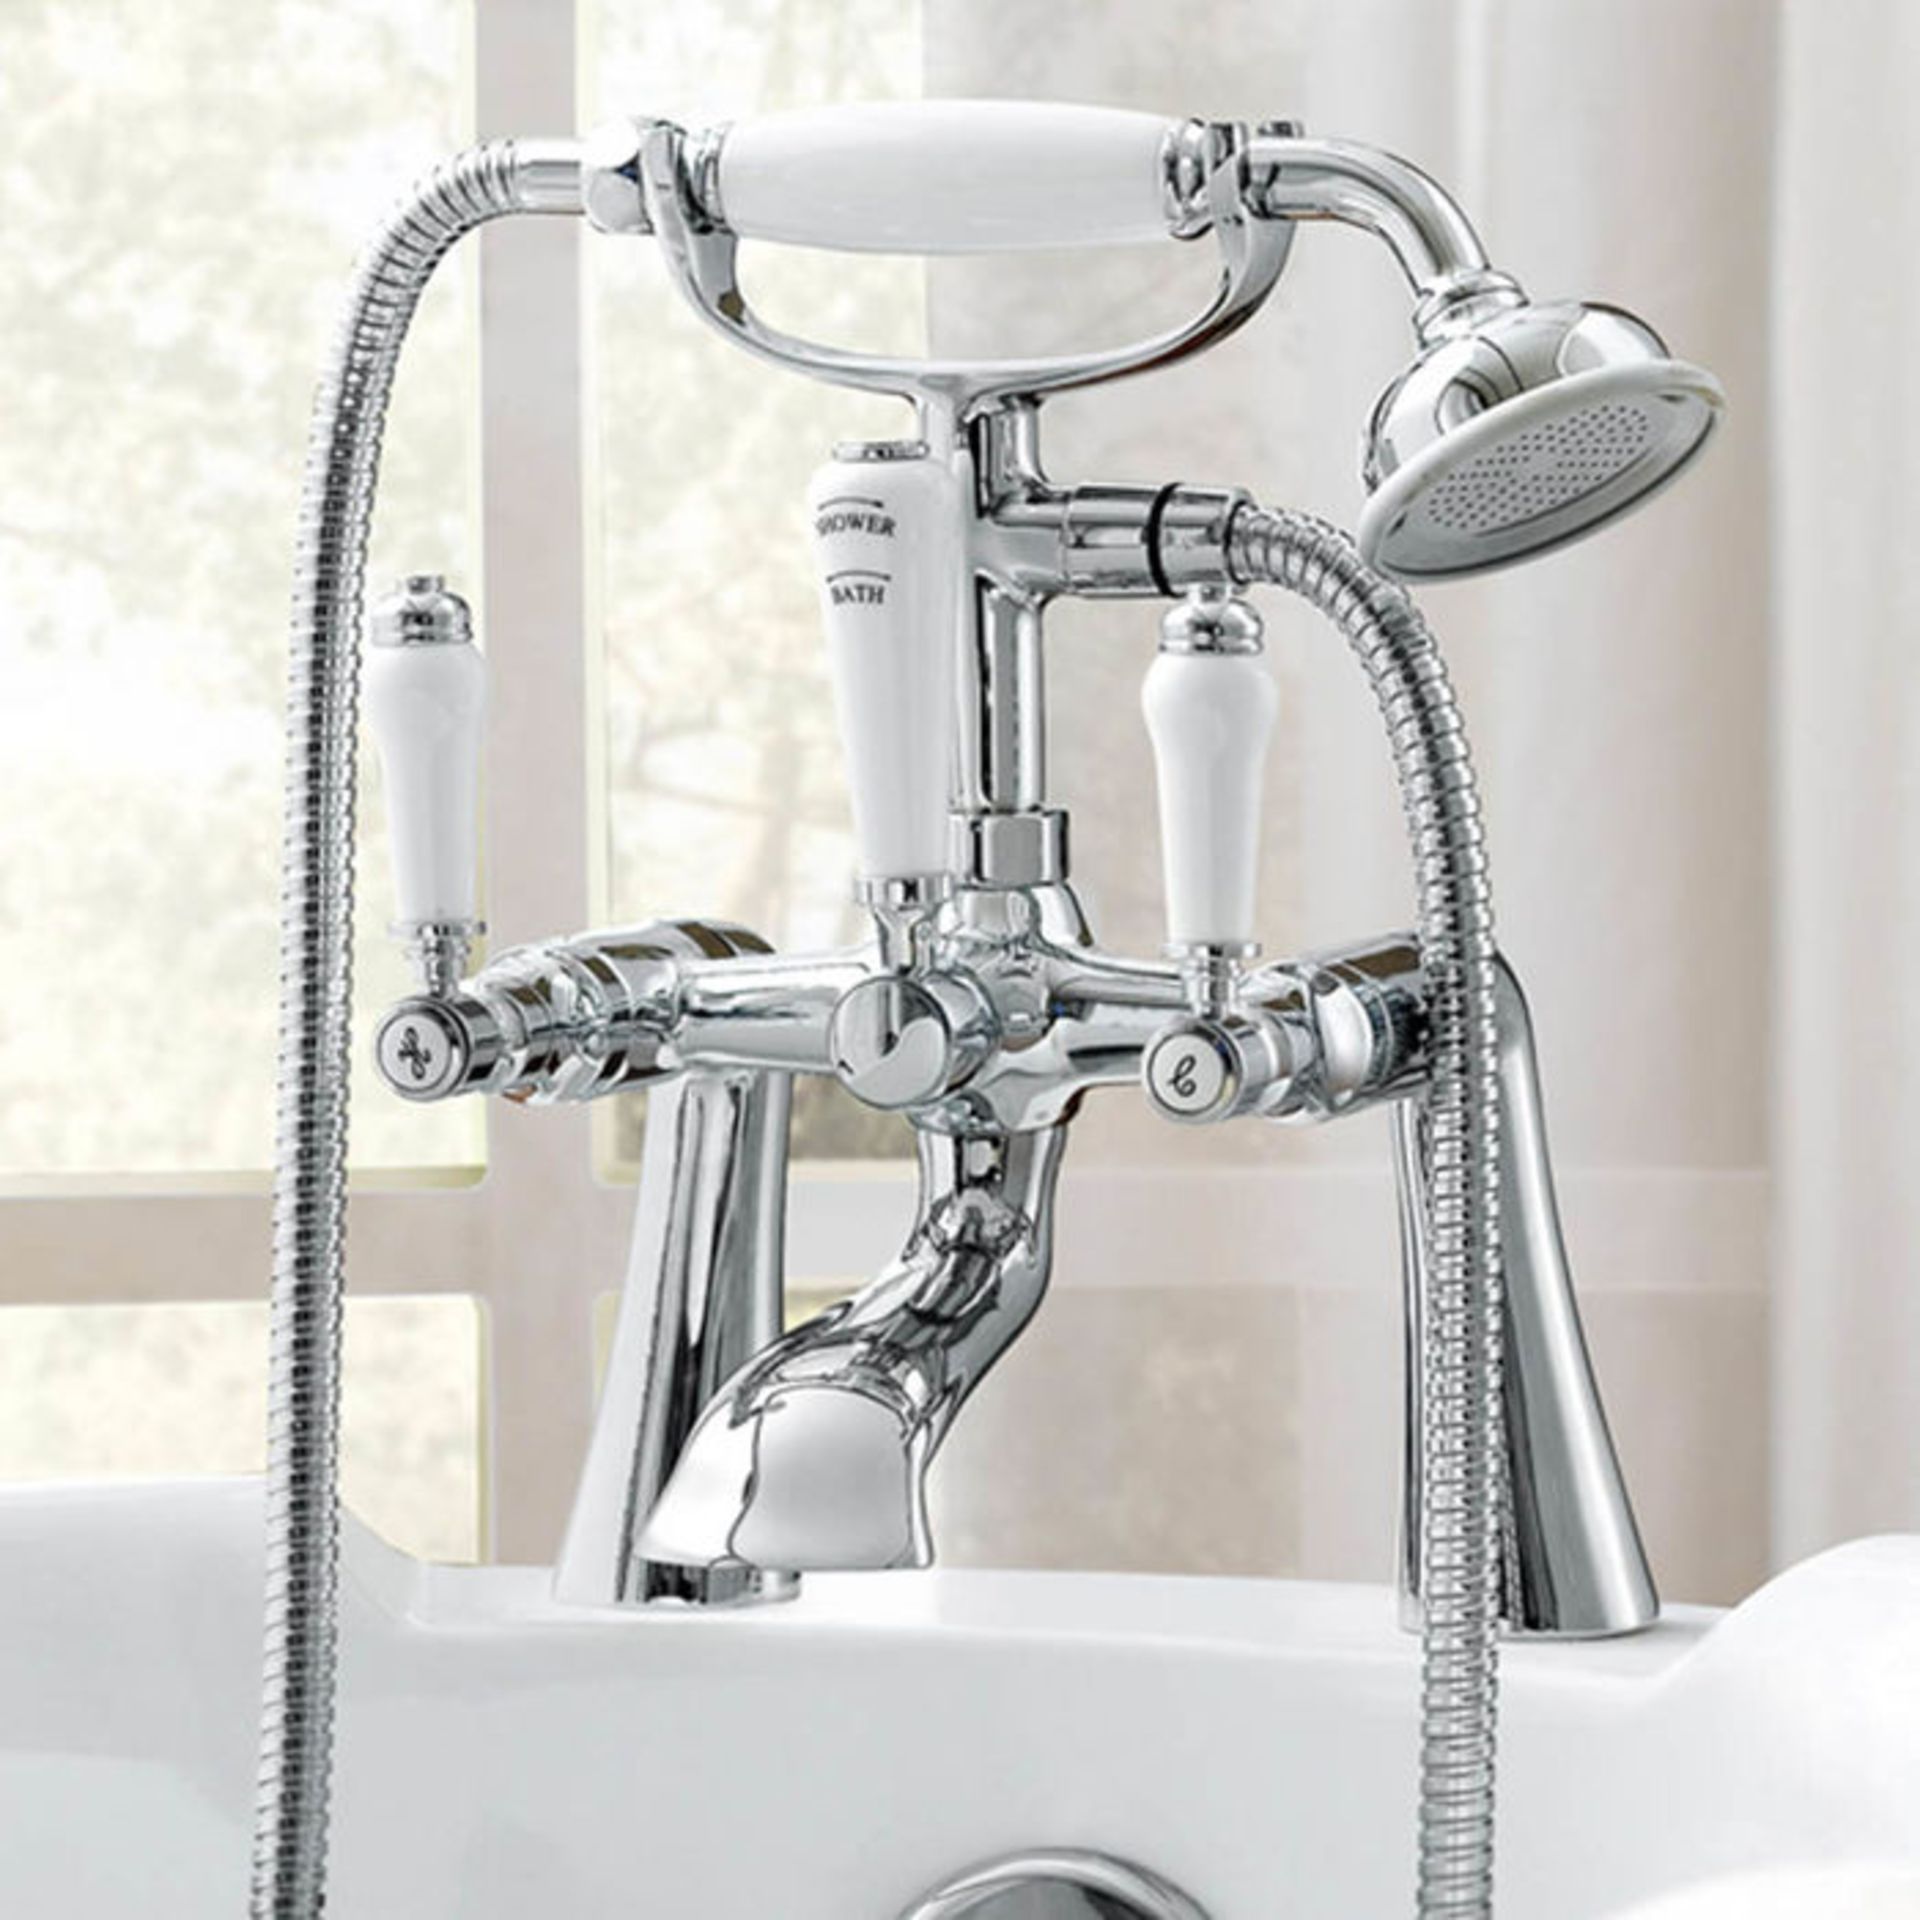 (PA39) Regal Chrome Traditional Bath Mixer Lever Tap with Hand Held Shower Chrome Plated Solid Brass